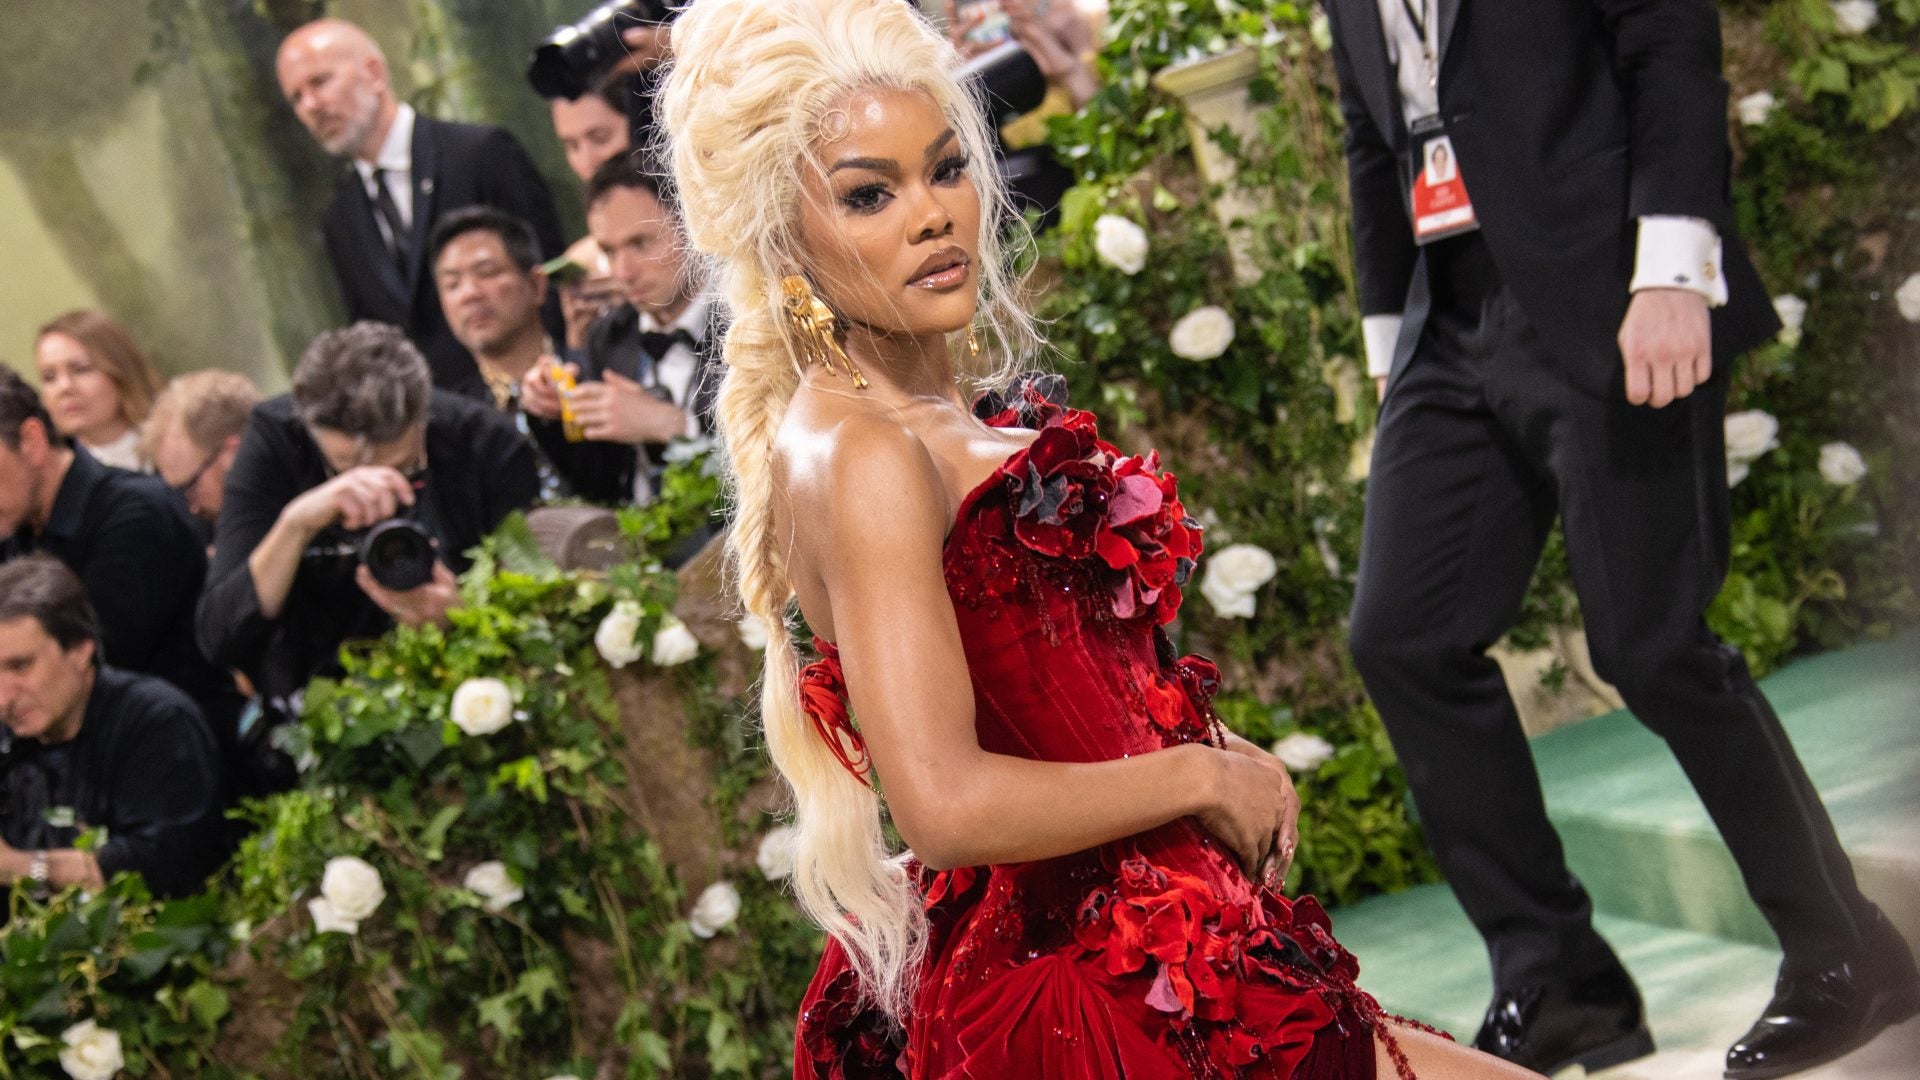 Iman Shumpert Has Some Thoughts About Estranged Wife Teyana Taylor’s Met Gala Look 